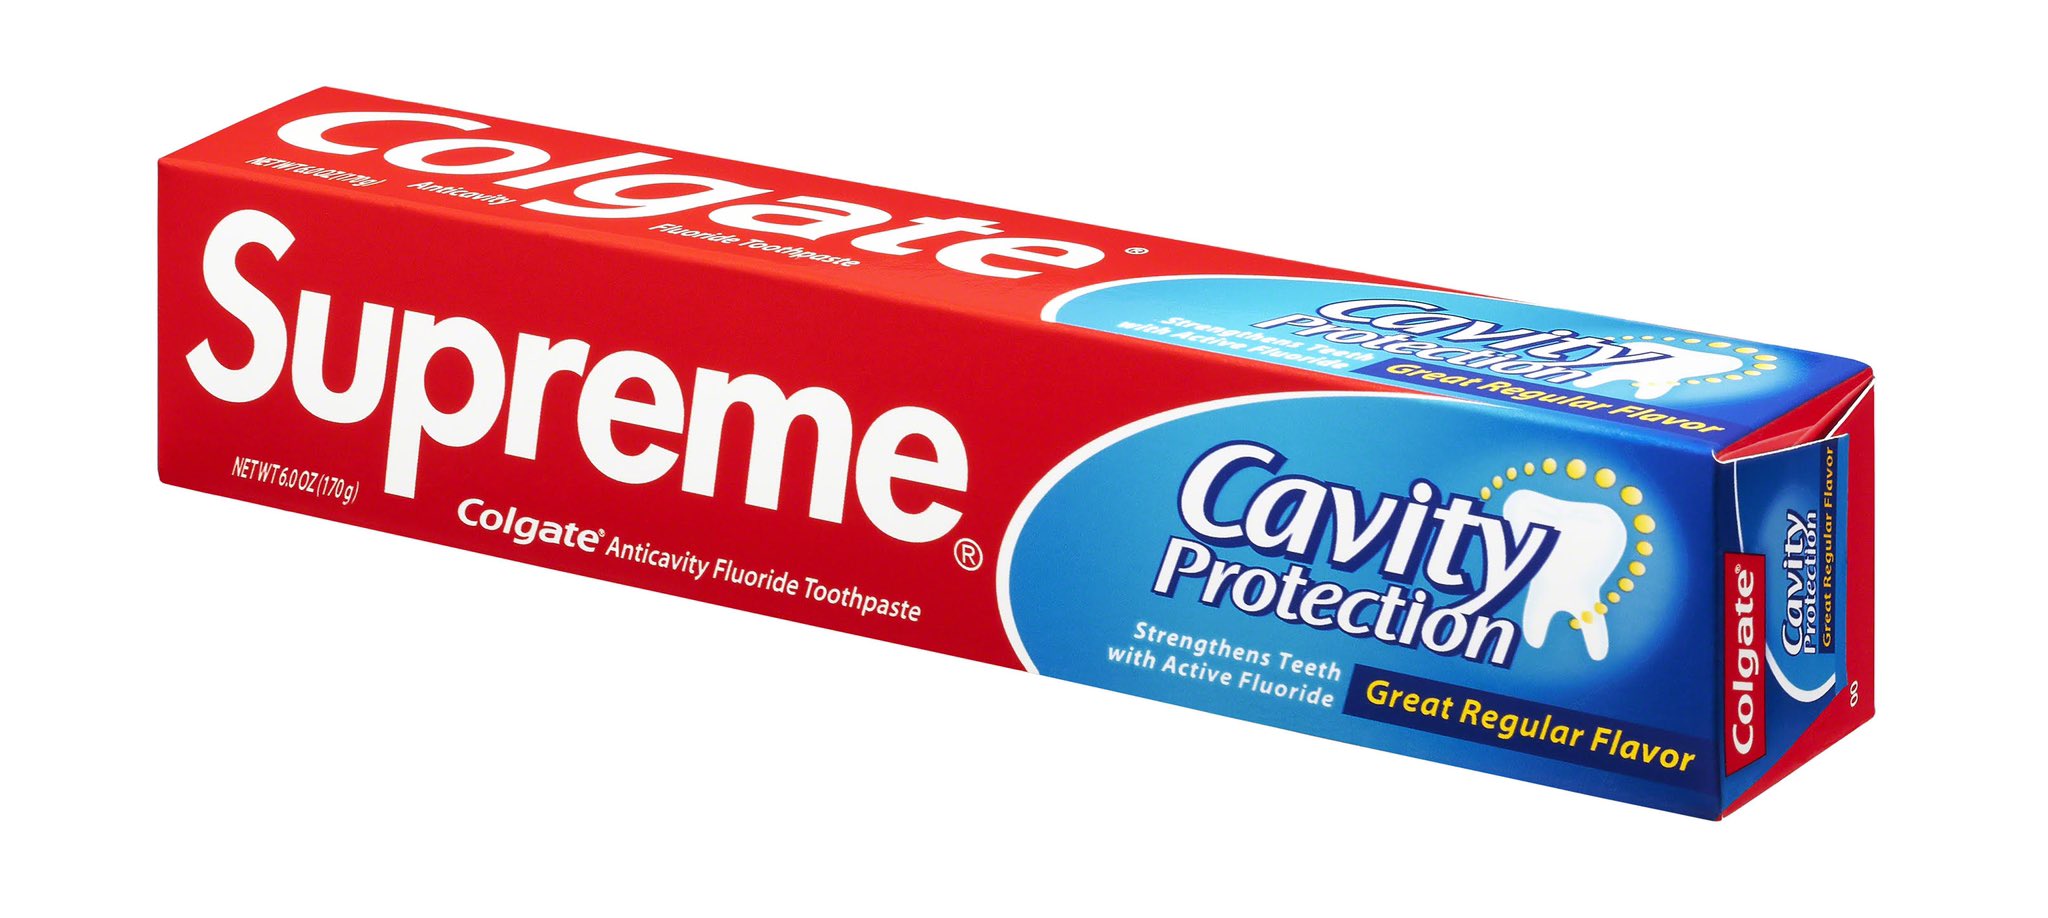 Colgate Smile on Twitter: "It's official. We have partnered Supreme to create this limited edition Colgate x Supreme 6oz Cavity Protection for Supreme's Fall/Winter 2020 collection. https://t.co/1WkvCkKNHH https://t.co/xCHIGx3Lj3" / Twitter